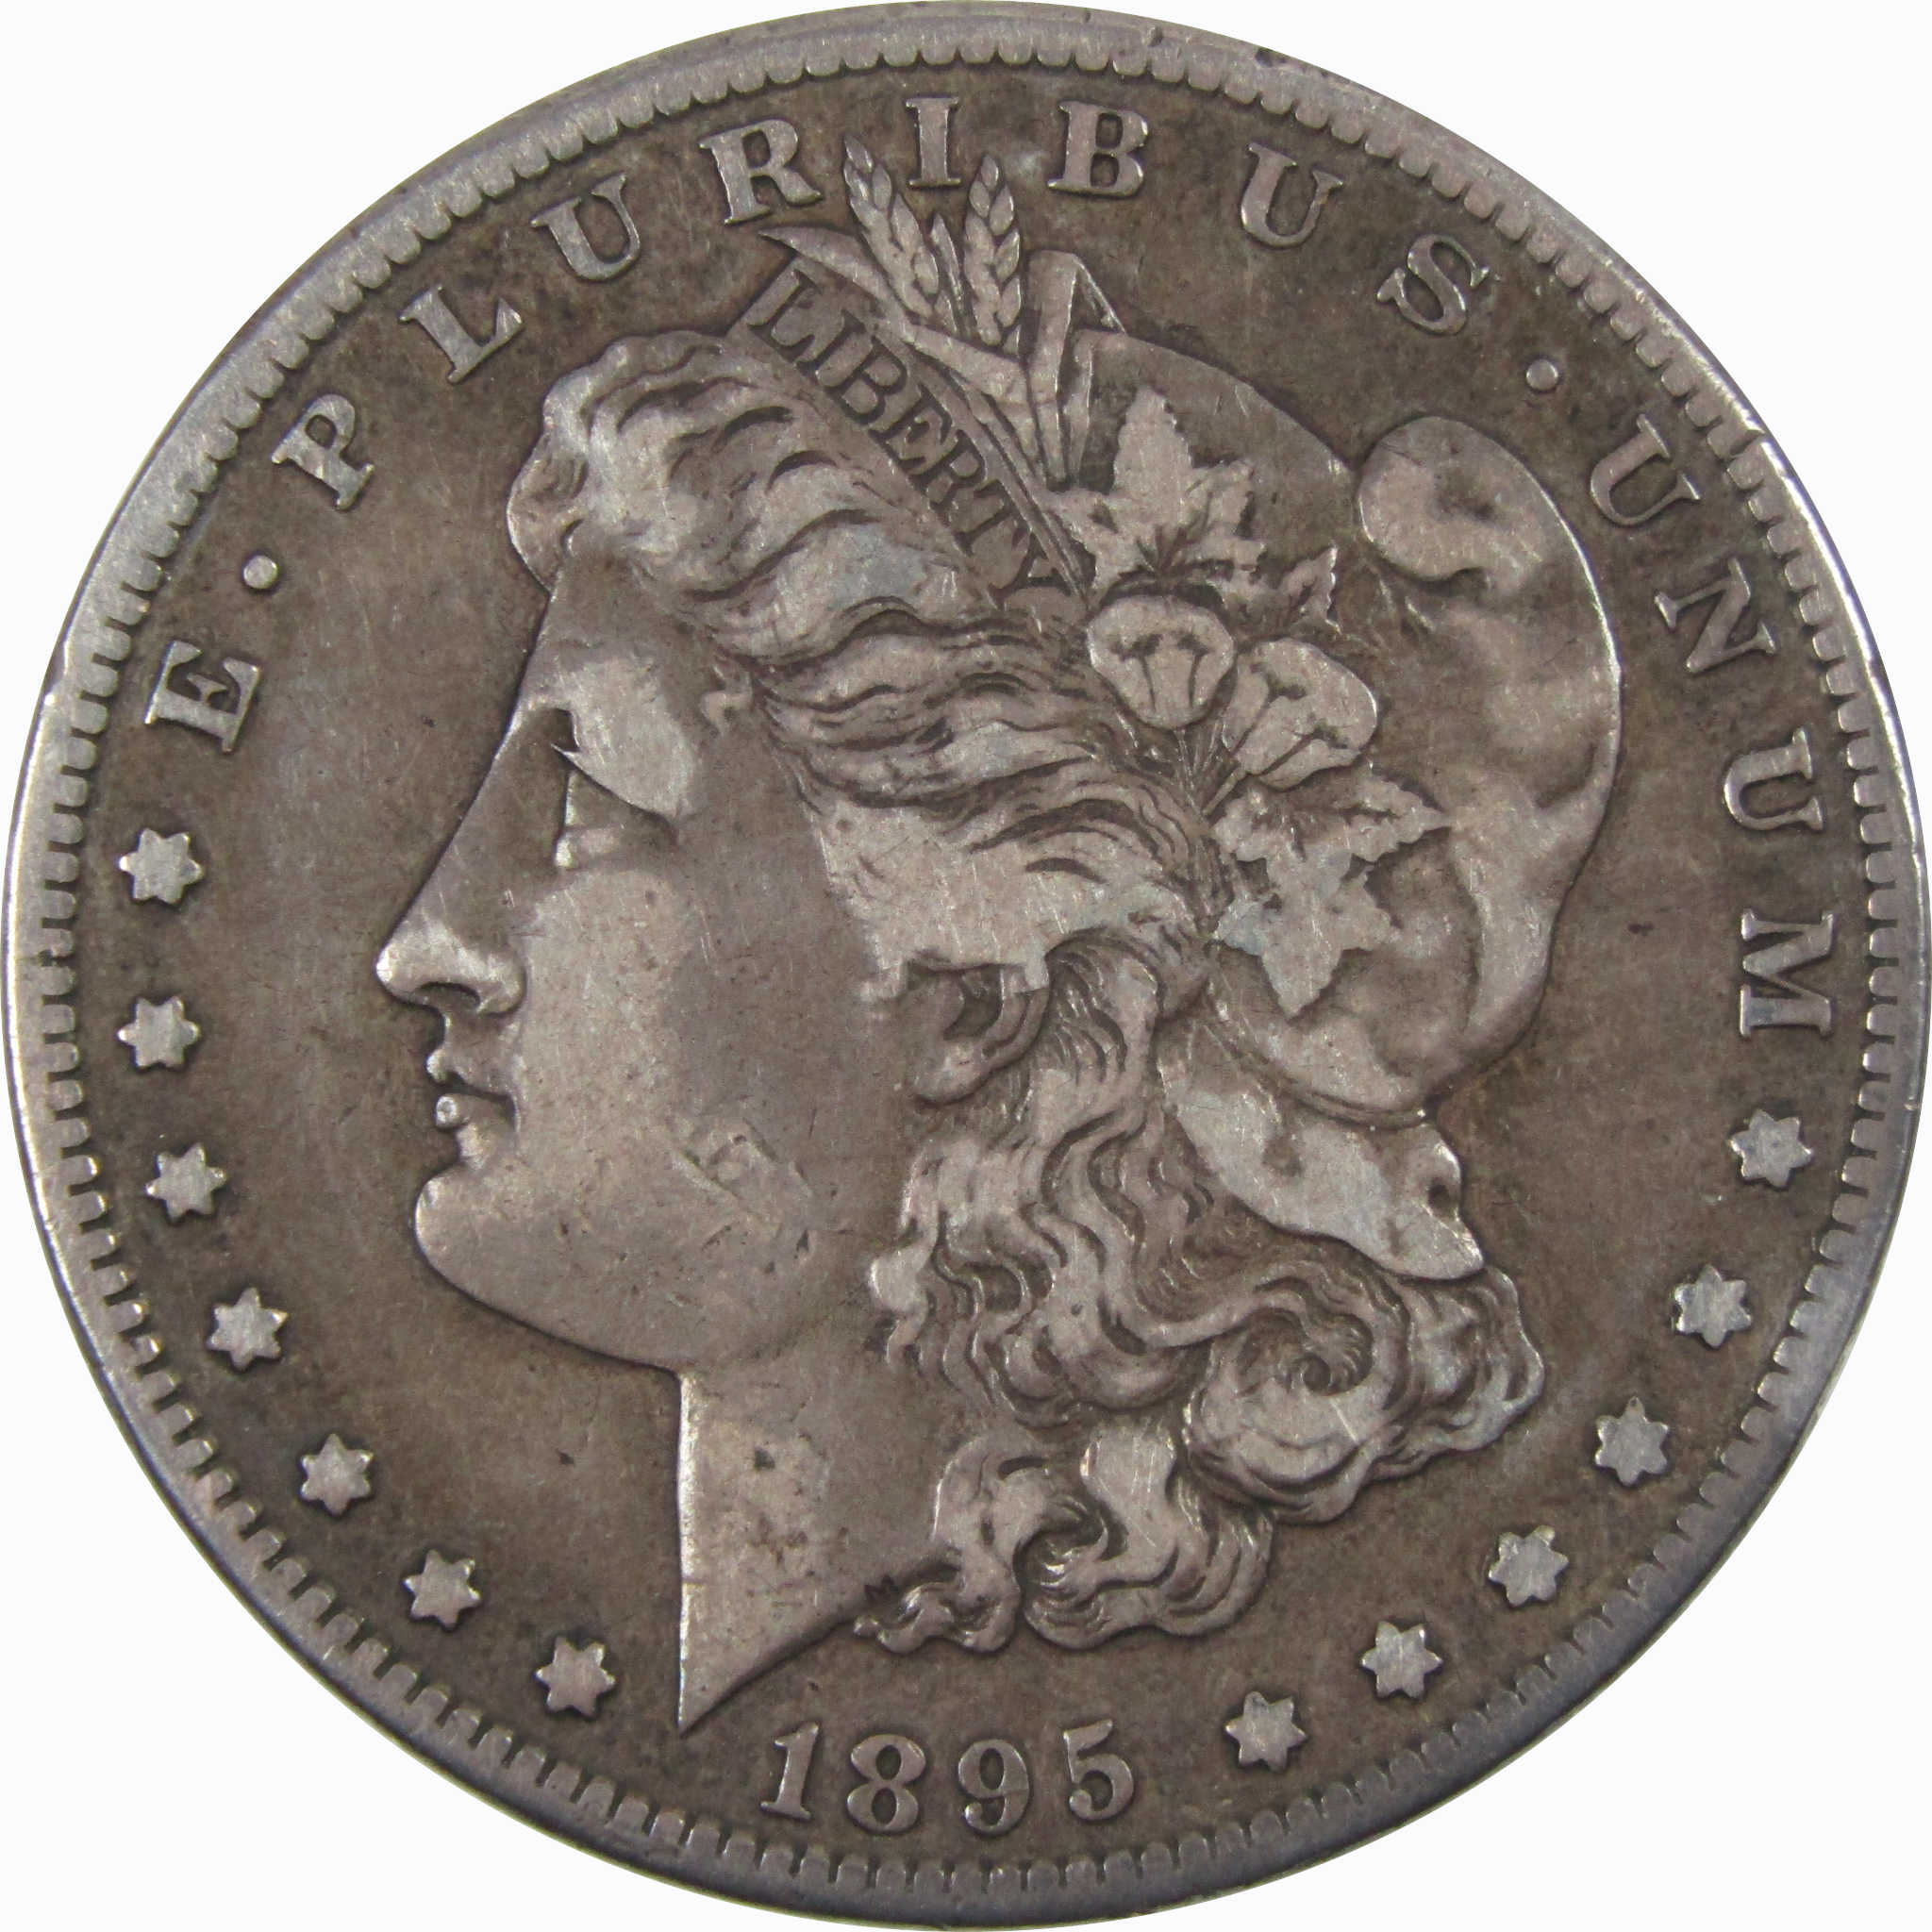 1895 S Morgan Dollar VF Very Fine 90% Silver $1 US Coin SKU:I3876 - Morgan coin - Morgan silver dollar - Morgan silver dollar for sale - Profile Coins &amp; Collectibles